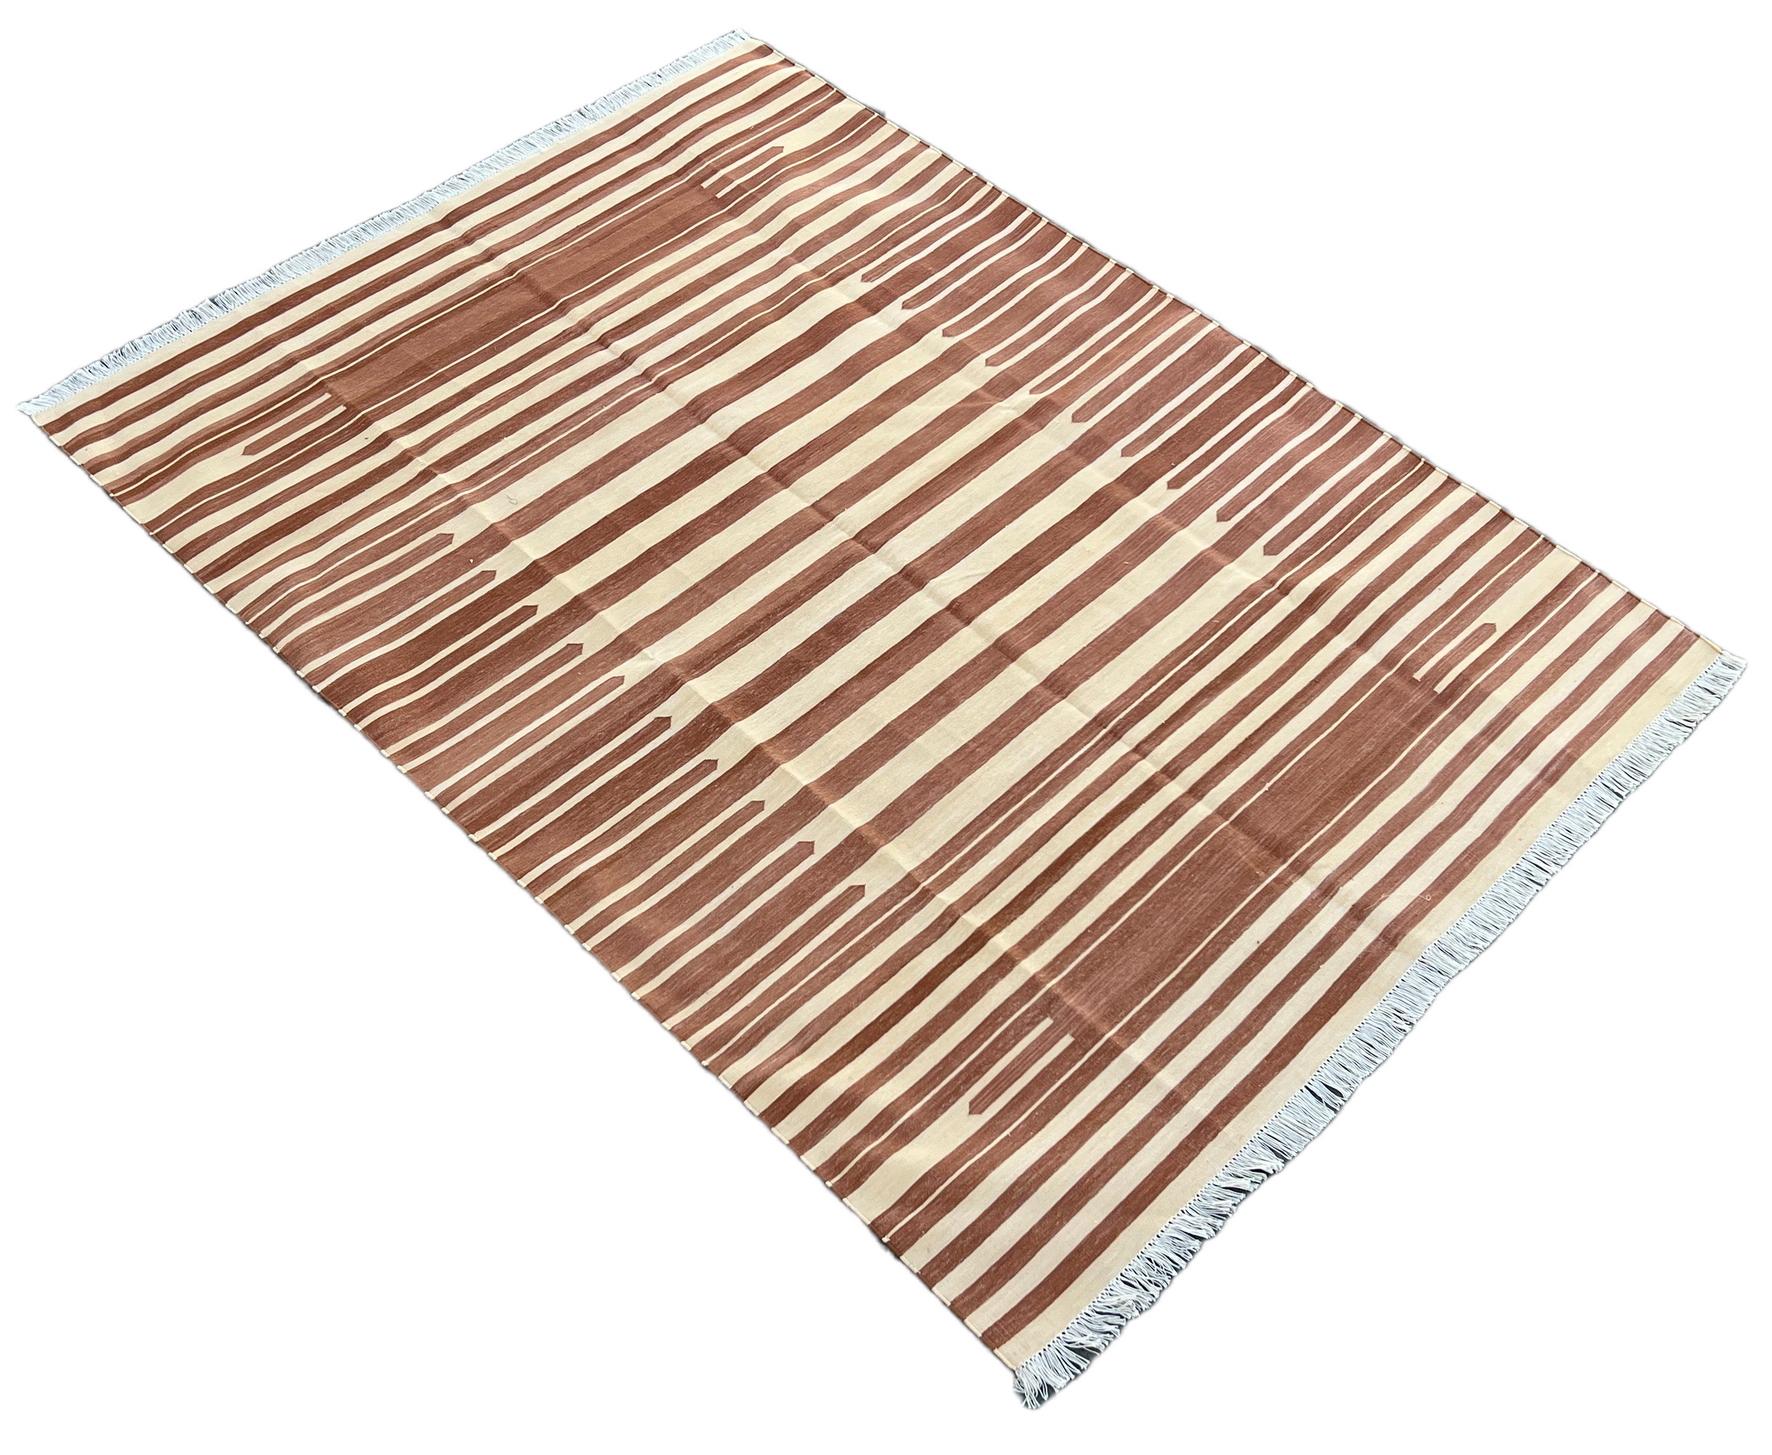 Handmade Cotton Area Flat Weave Rug, 5x7 Tan And Cream Striped Indian Dhurrie For Sale 4